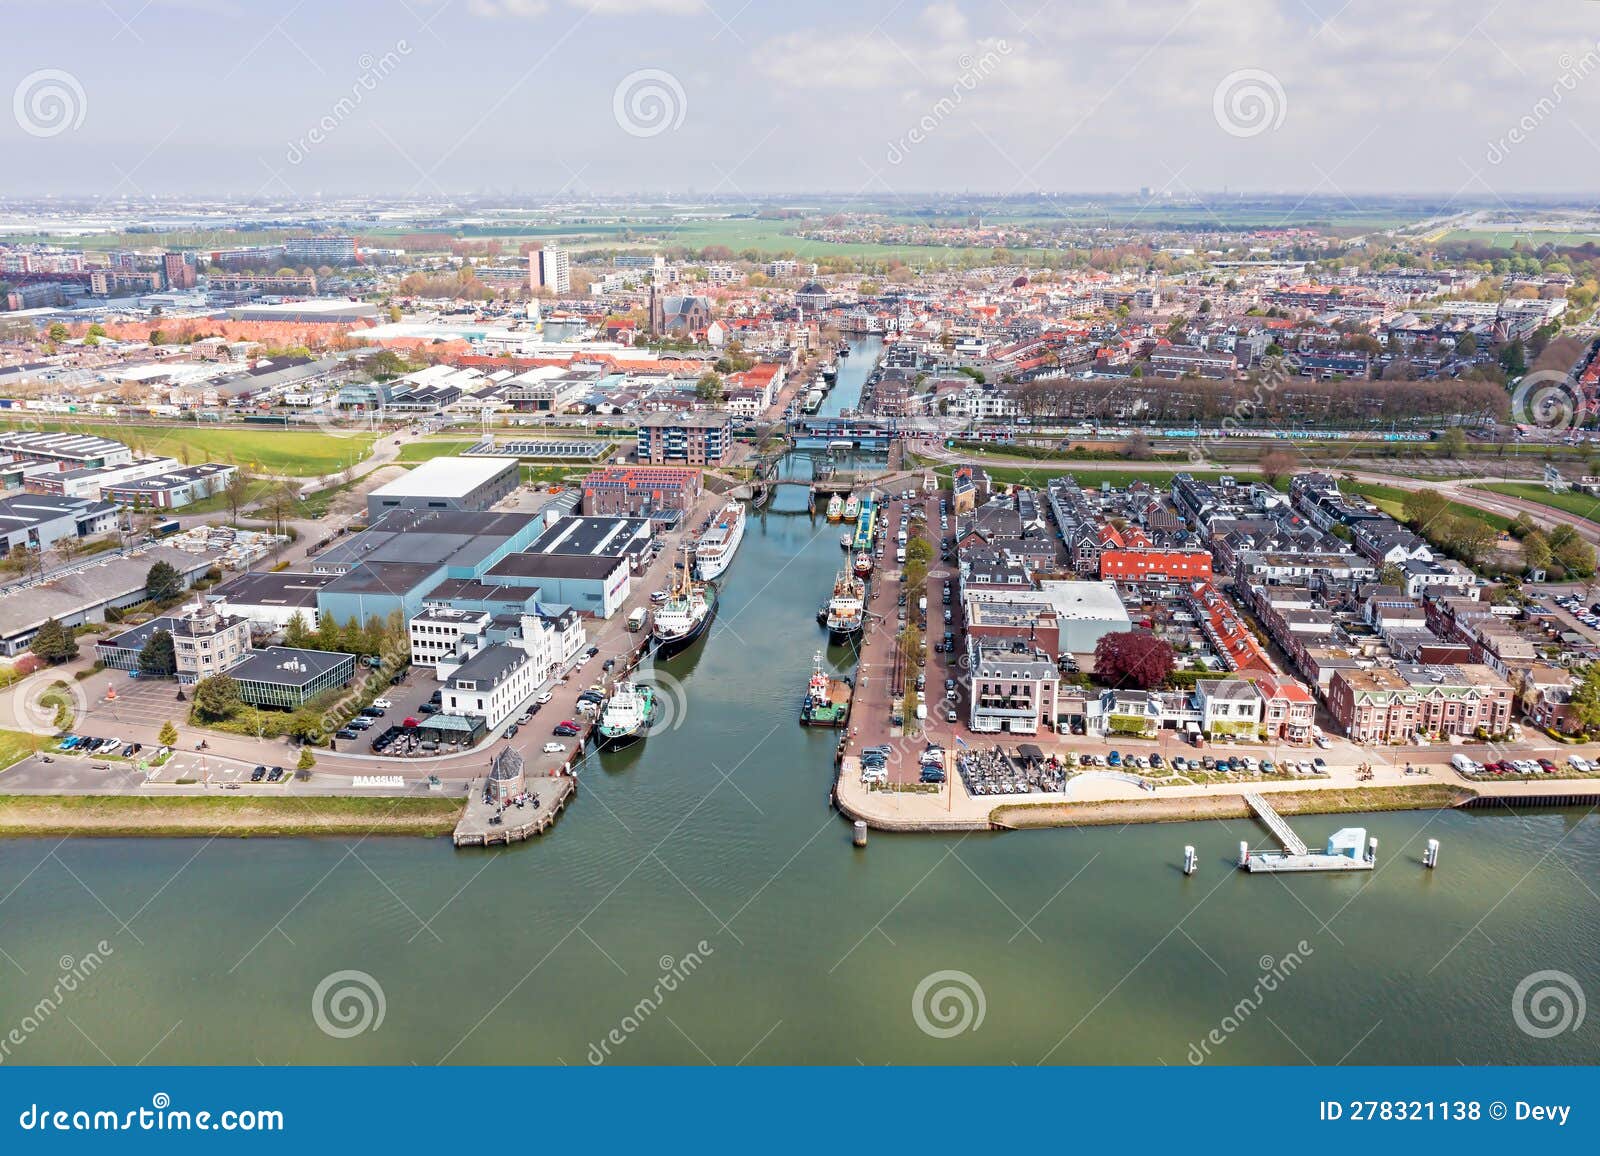 aerial from the city maassluis in the netherlands